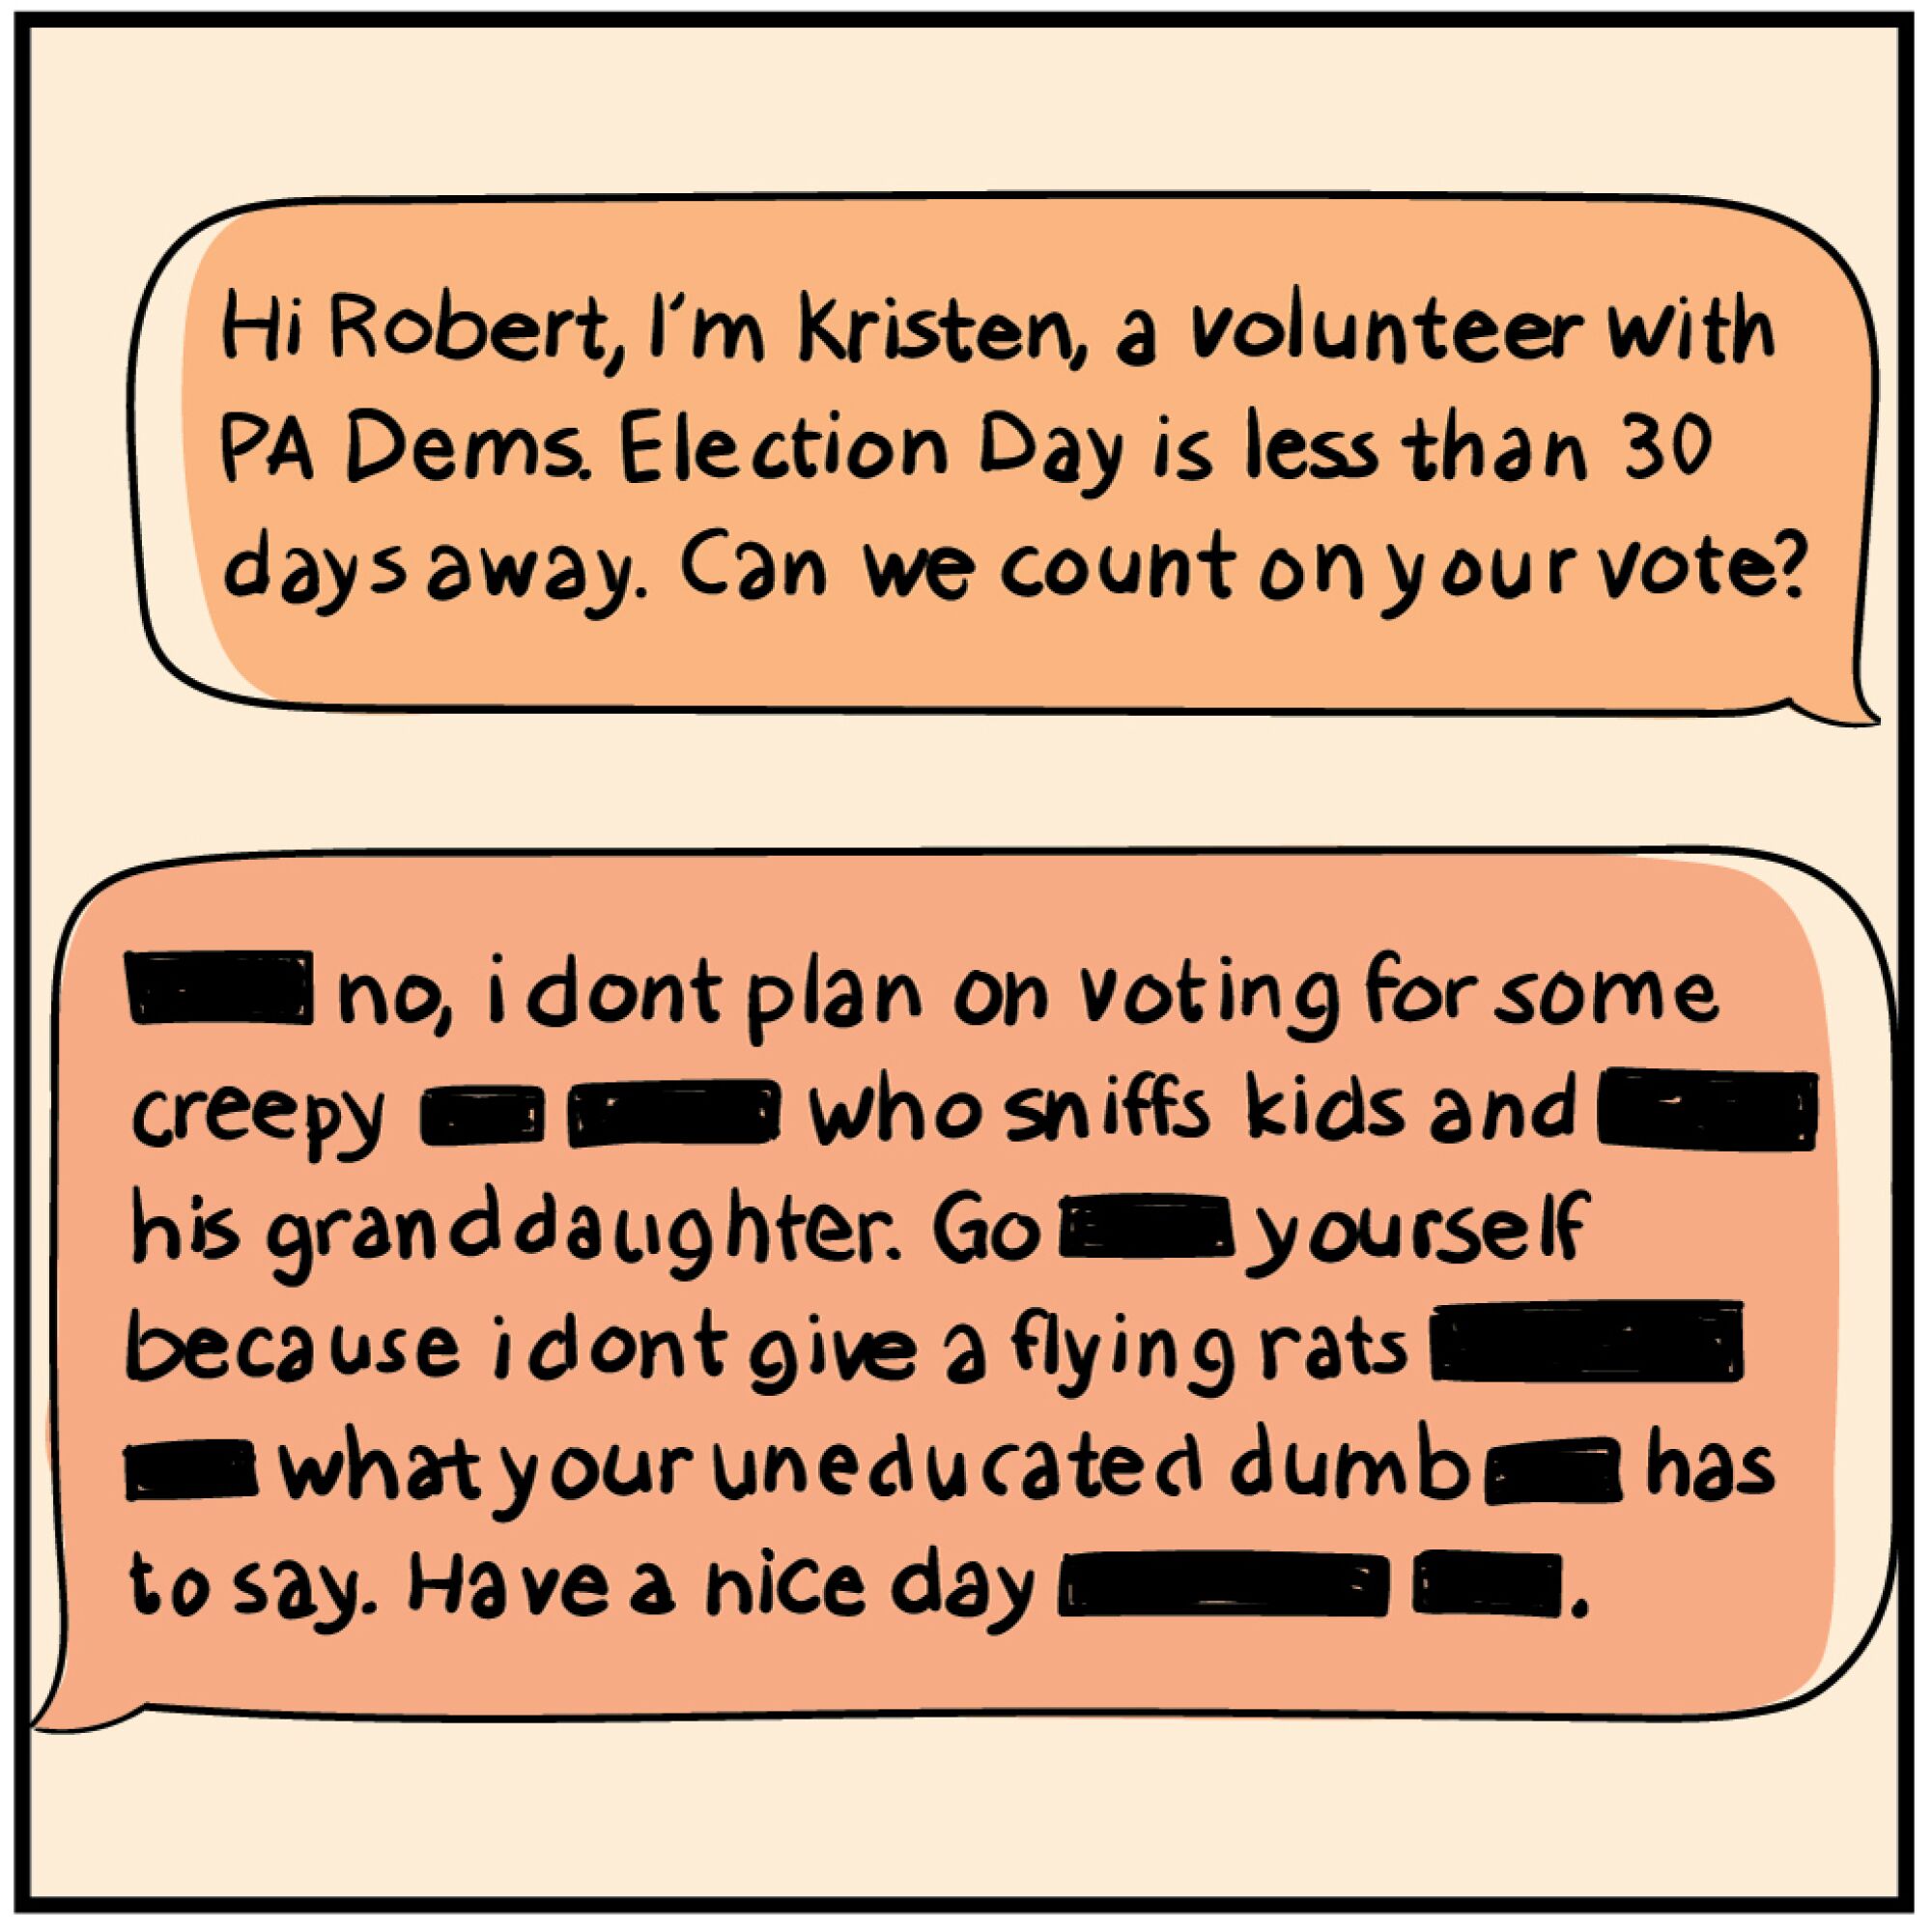 Comic panel of a disheartening text exchange with a potential voter